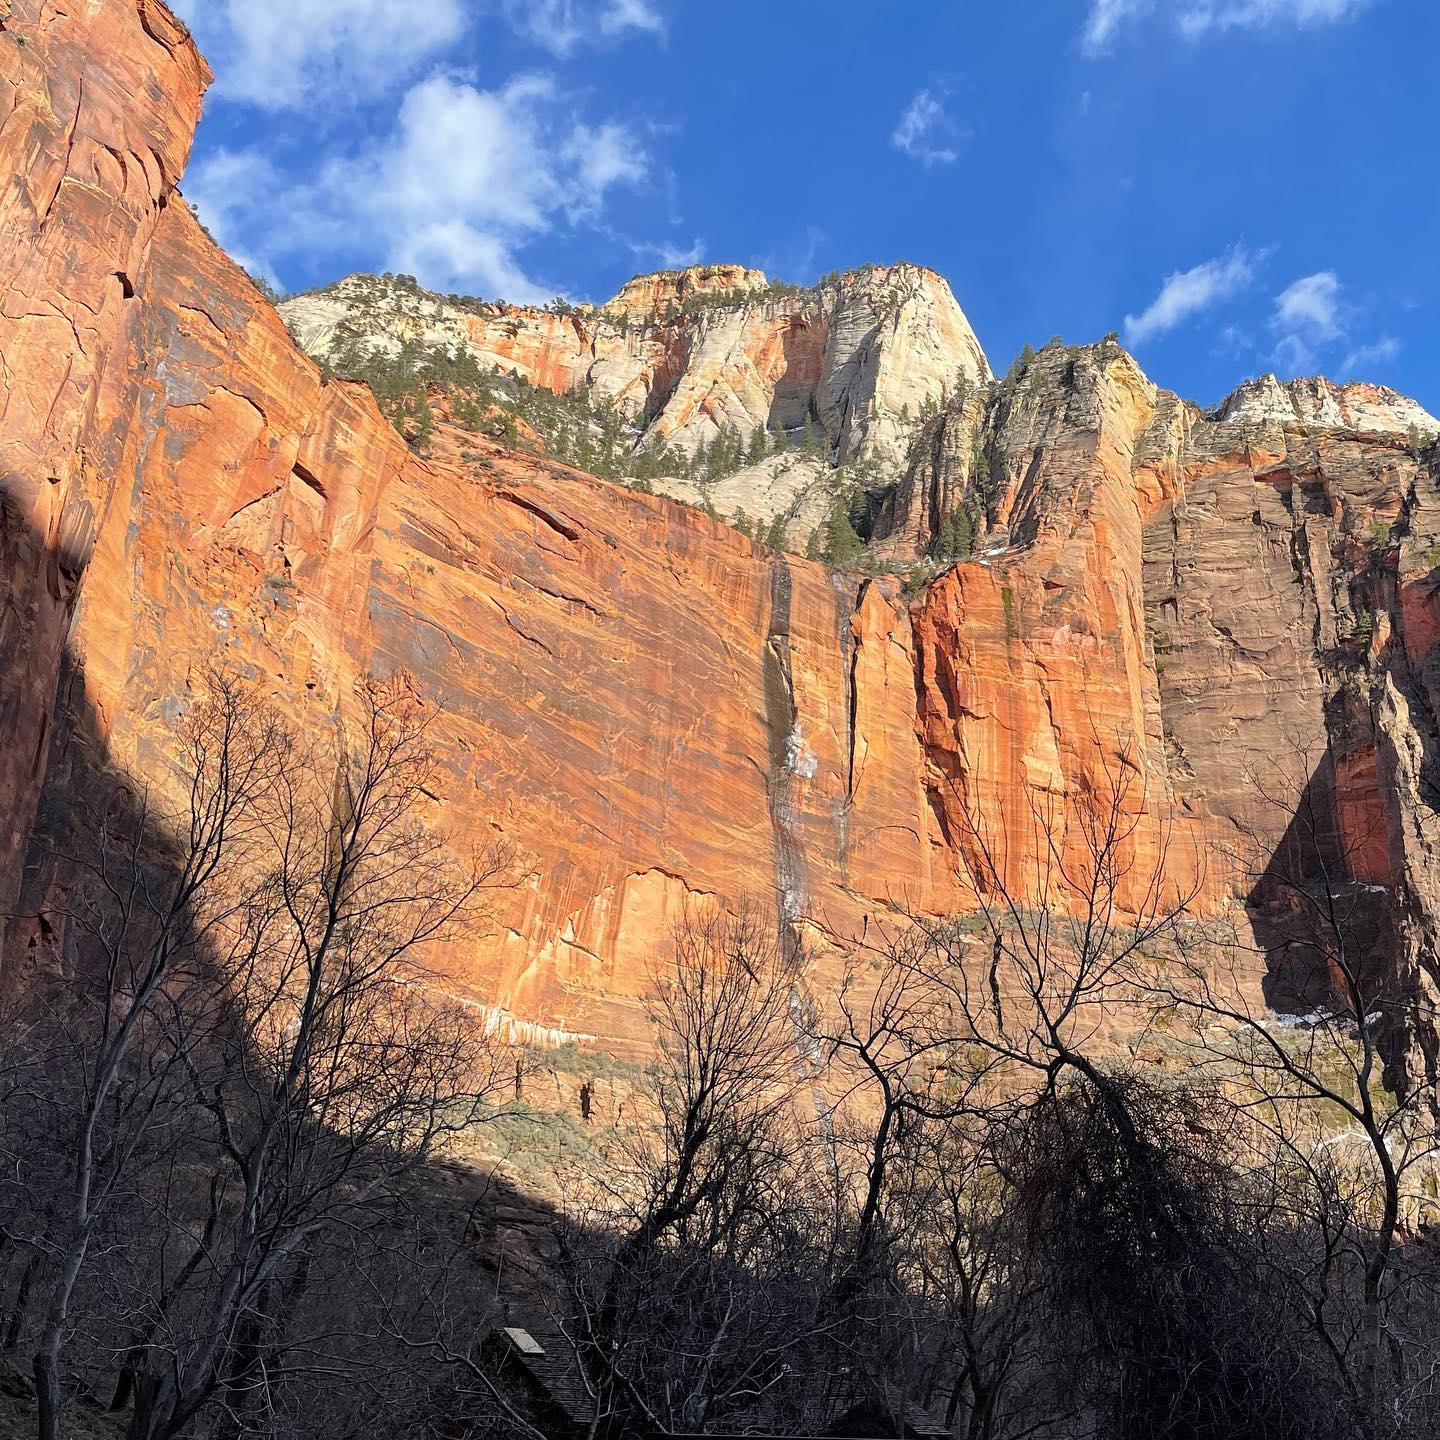 “As little design as possible” is the right amount here at Zion. @zionnps